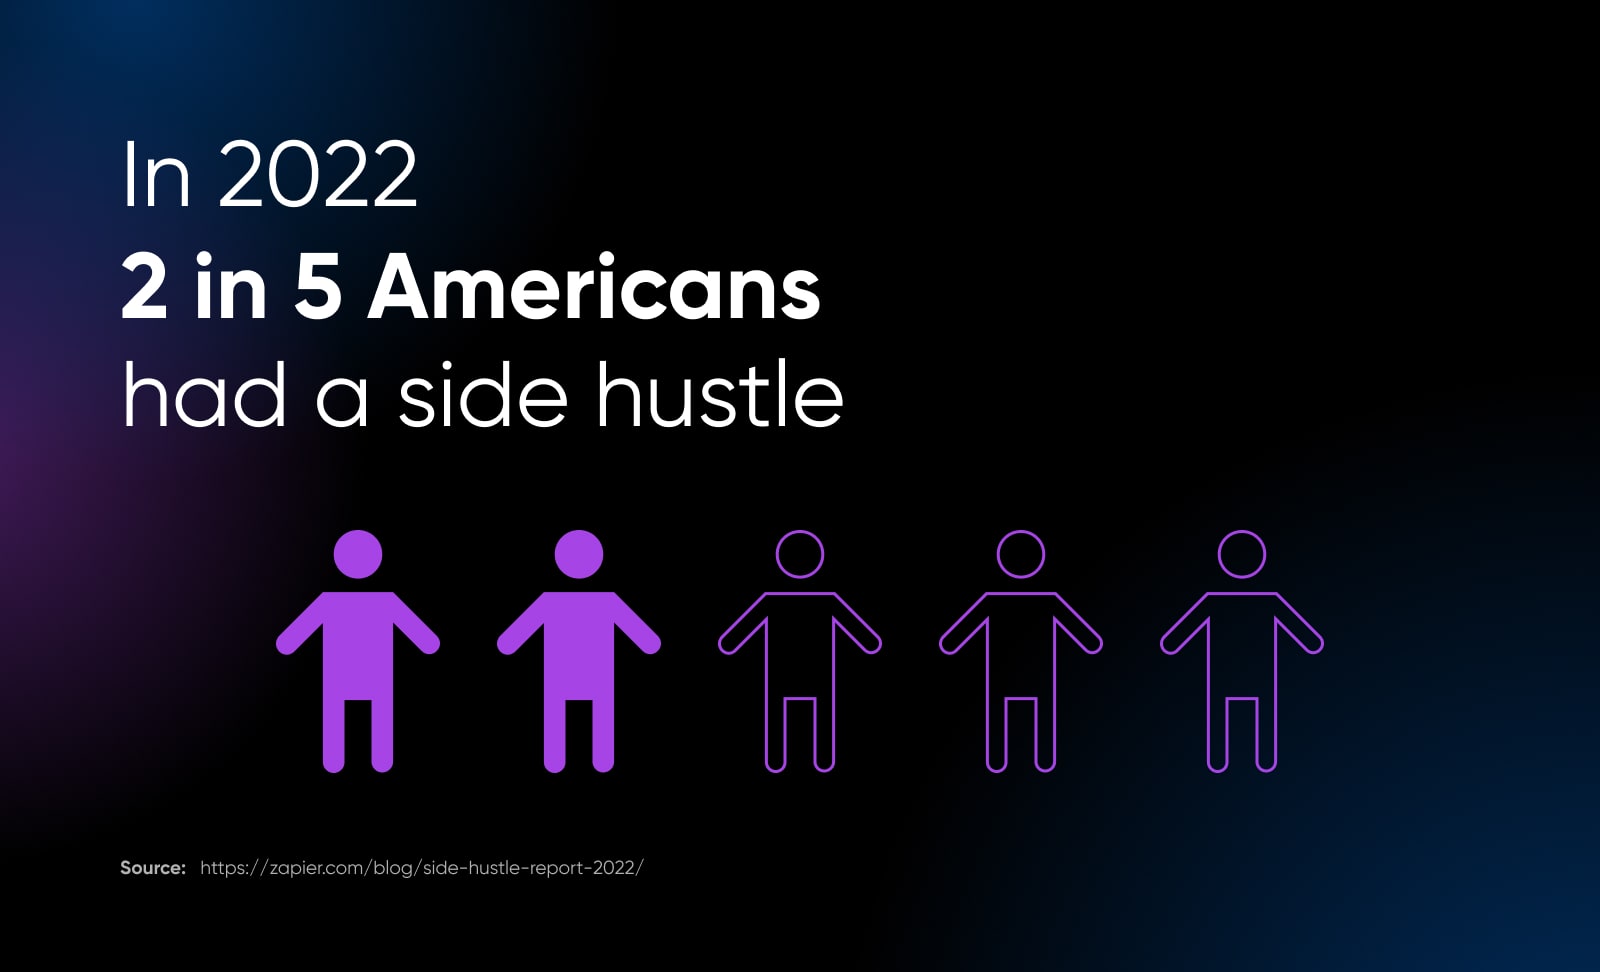 in 2022 2 in 5 Americans had a side hustle graphic showing 5 people, 2 of them are filled in to represent the stat